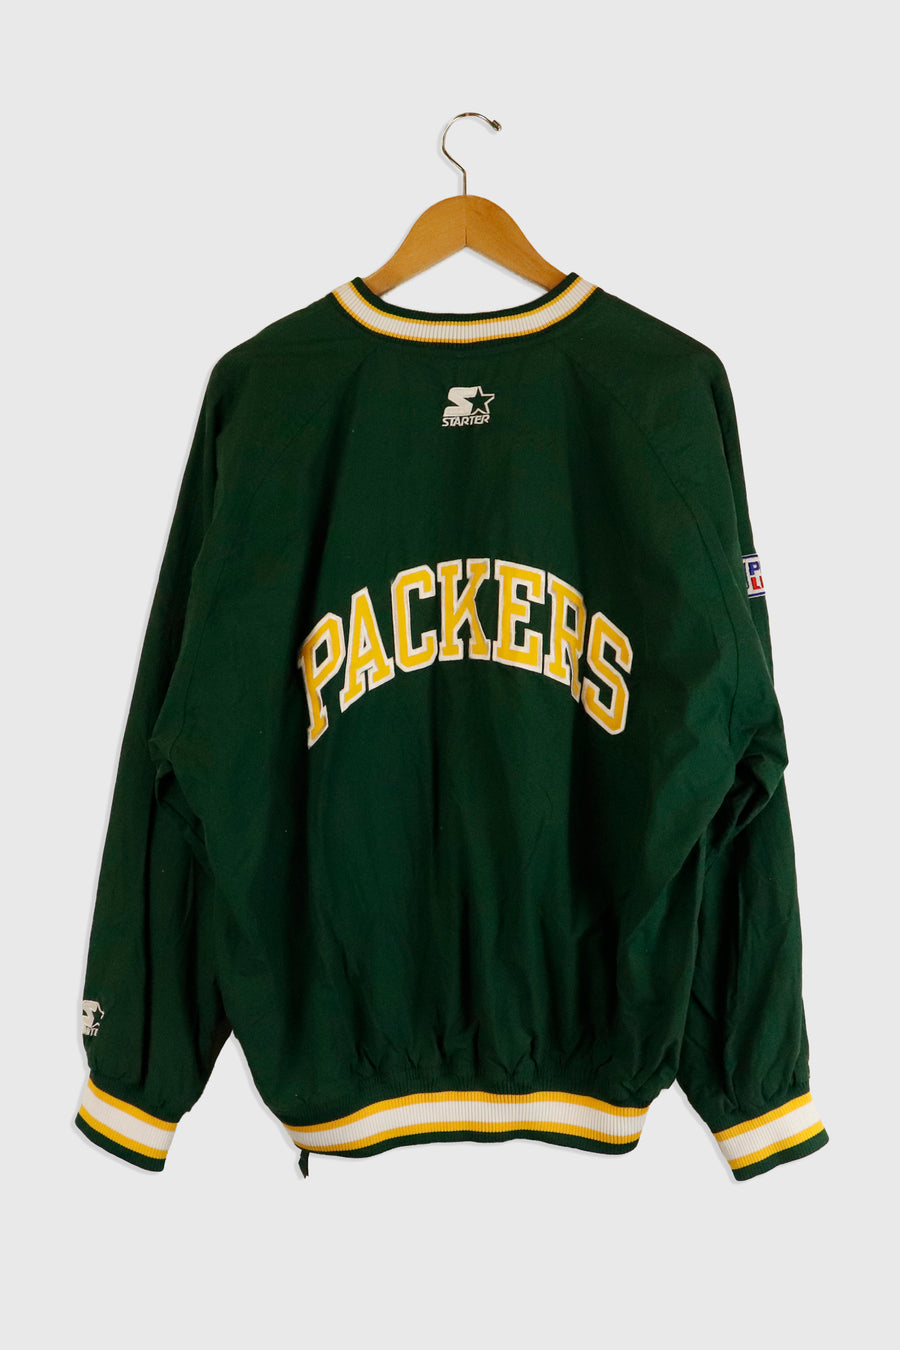 Vintage NFL Green Bay Packers Quarter Button Up Side Zip Pullover Jacket Sz M